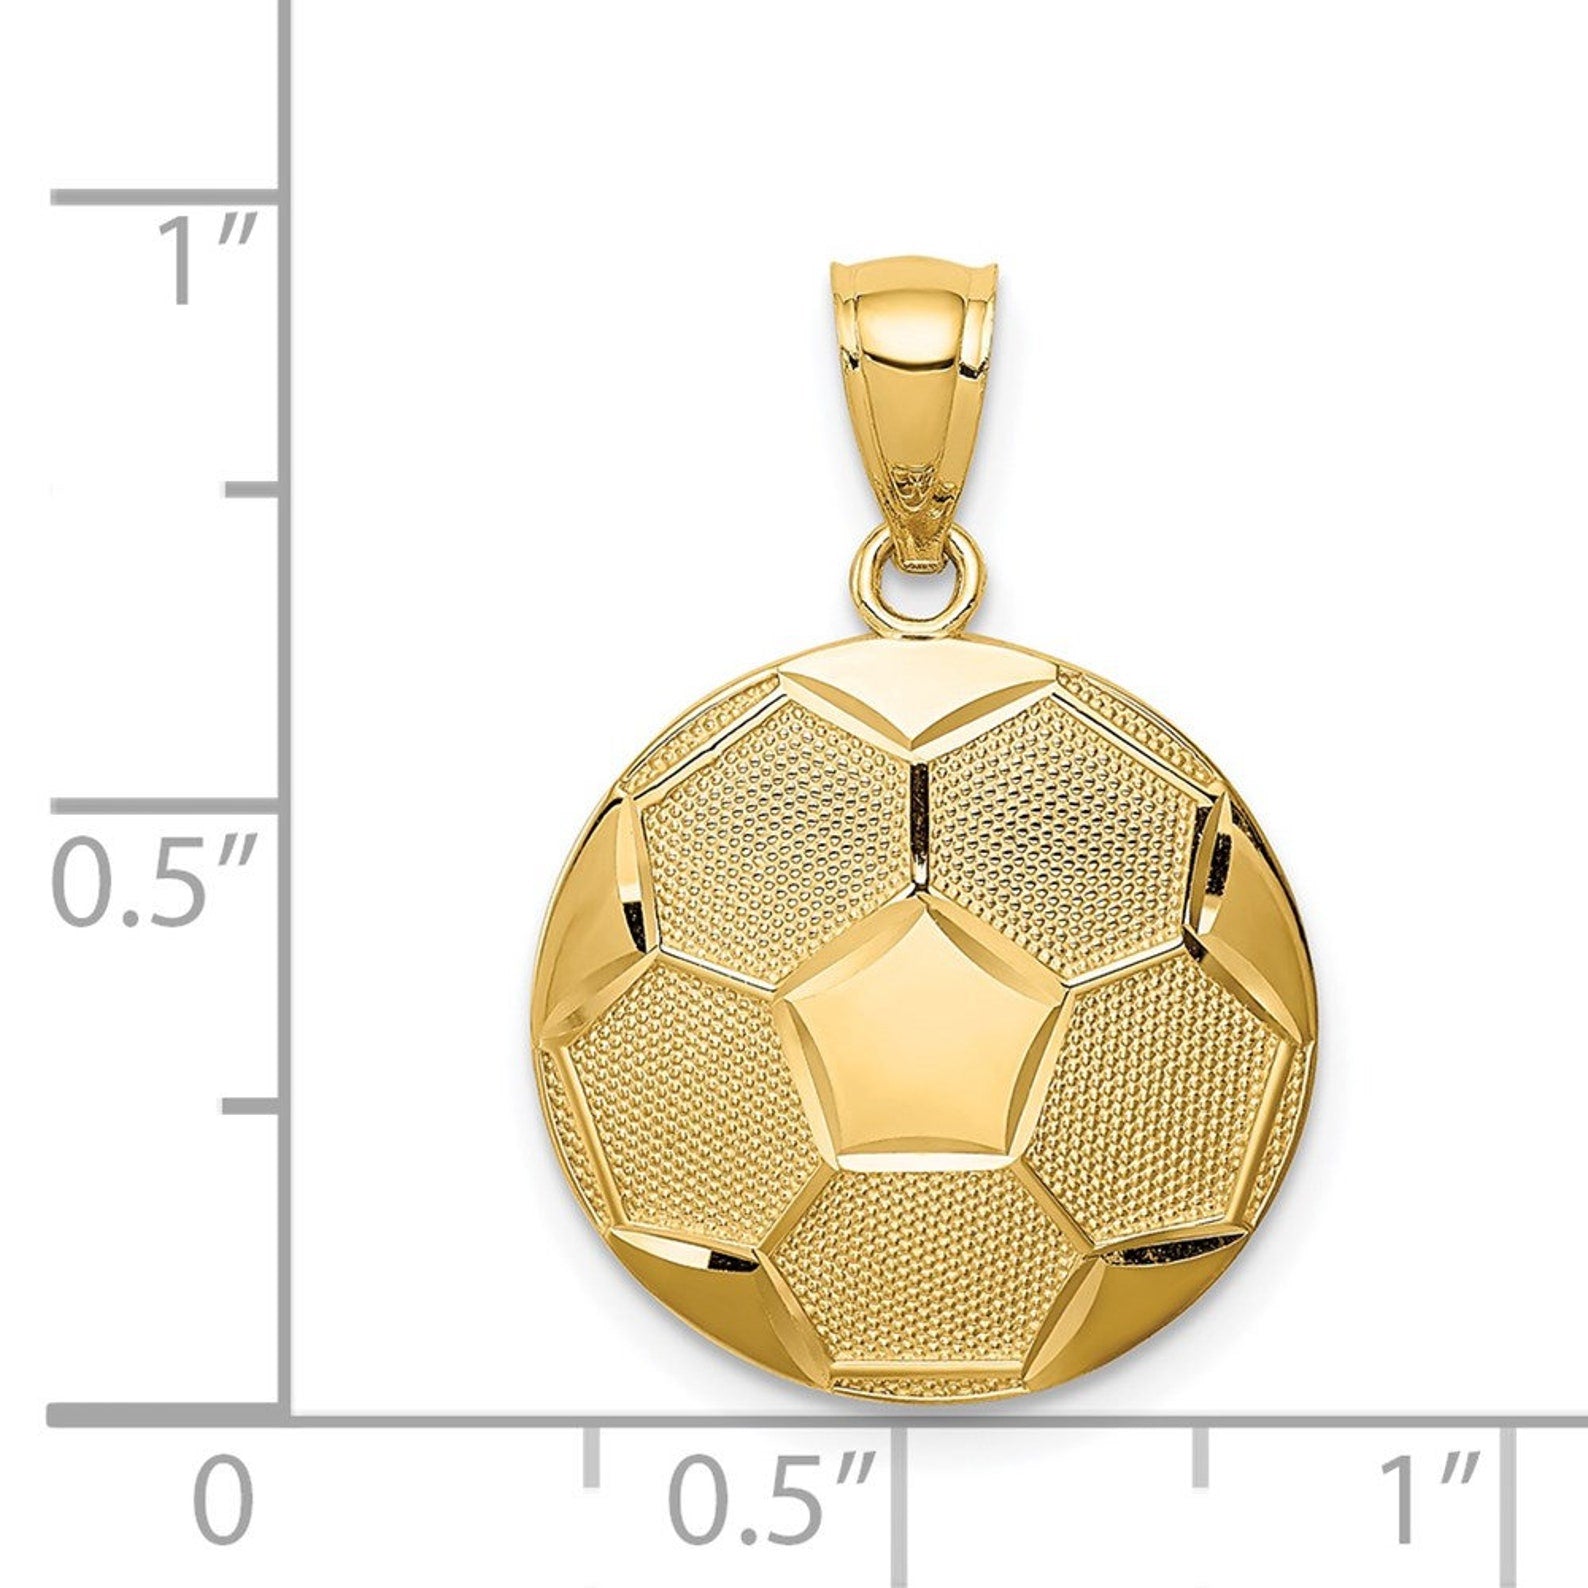 Gold Textured Soccer Ball Pendant Model-C4631 - Charlie & Co. Jewelry